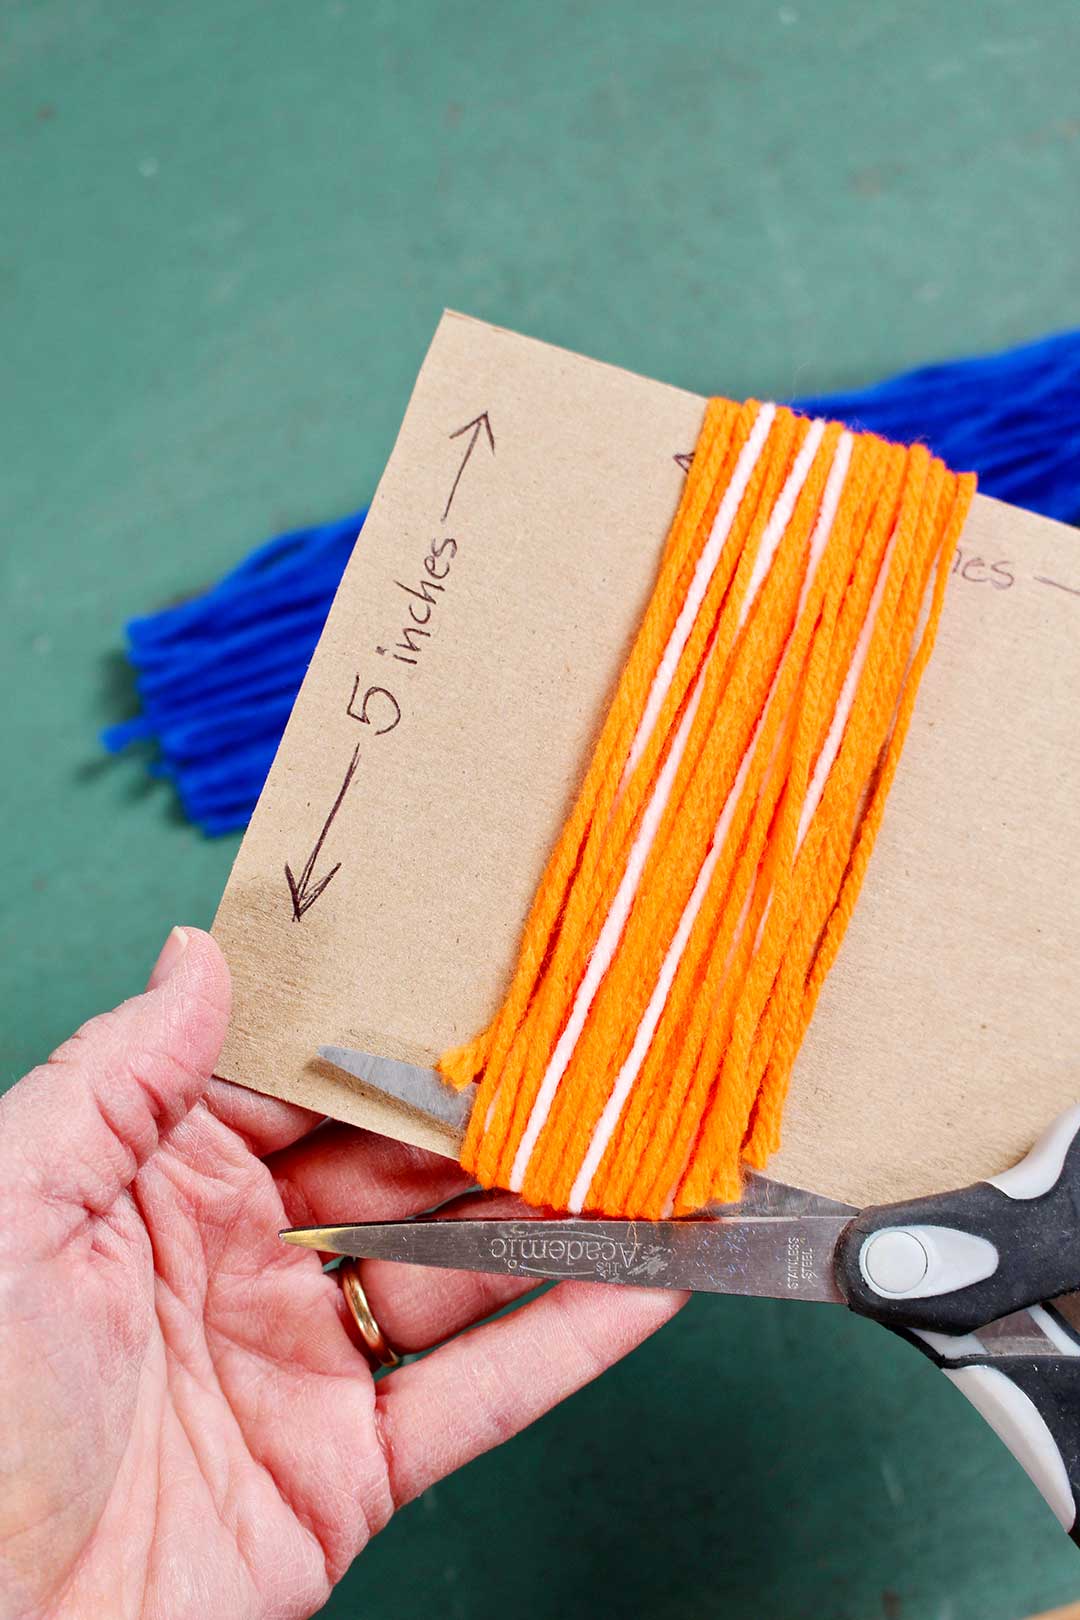 Orange and white yarn wrapped around a piece of cardboard, being cut by a pair of scissors.